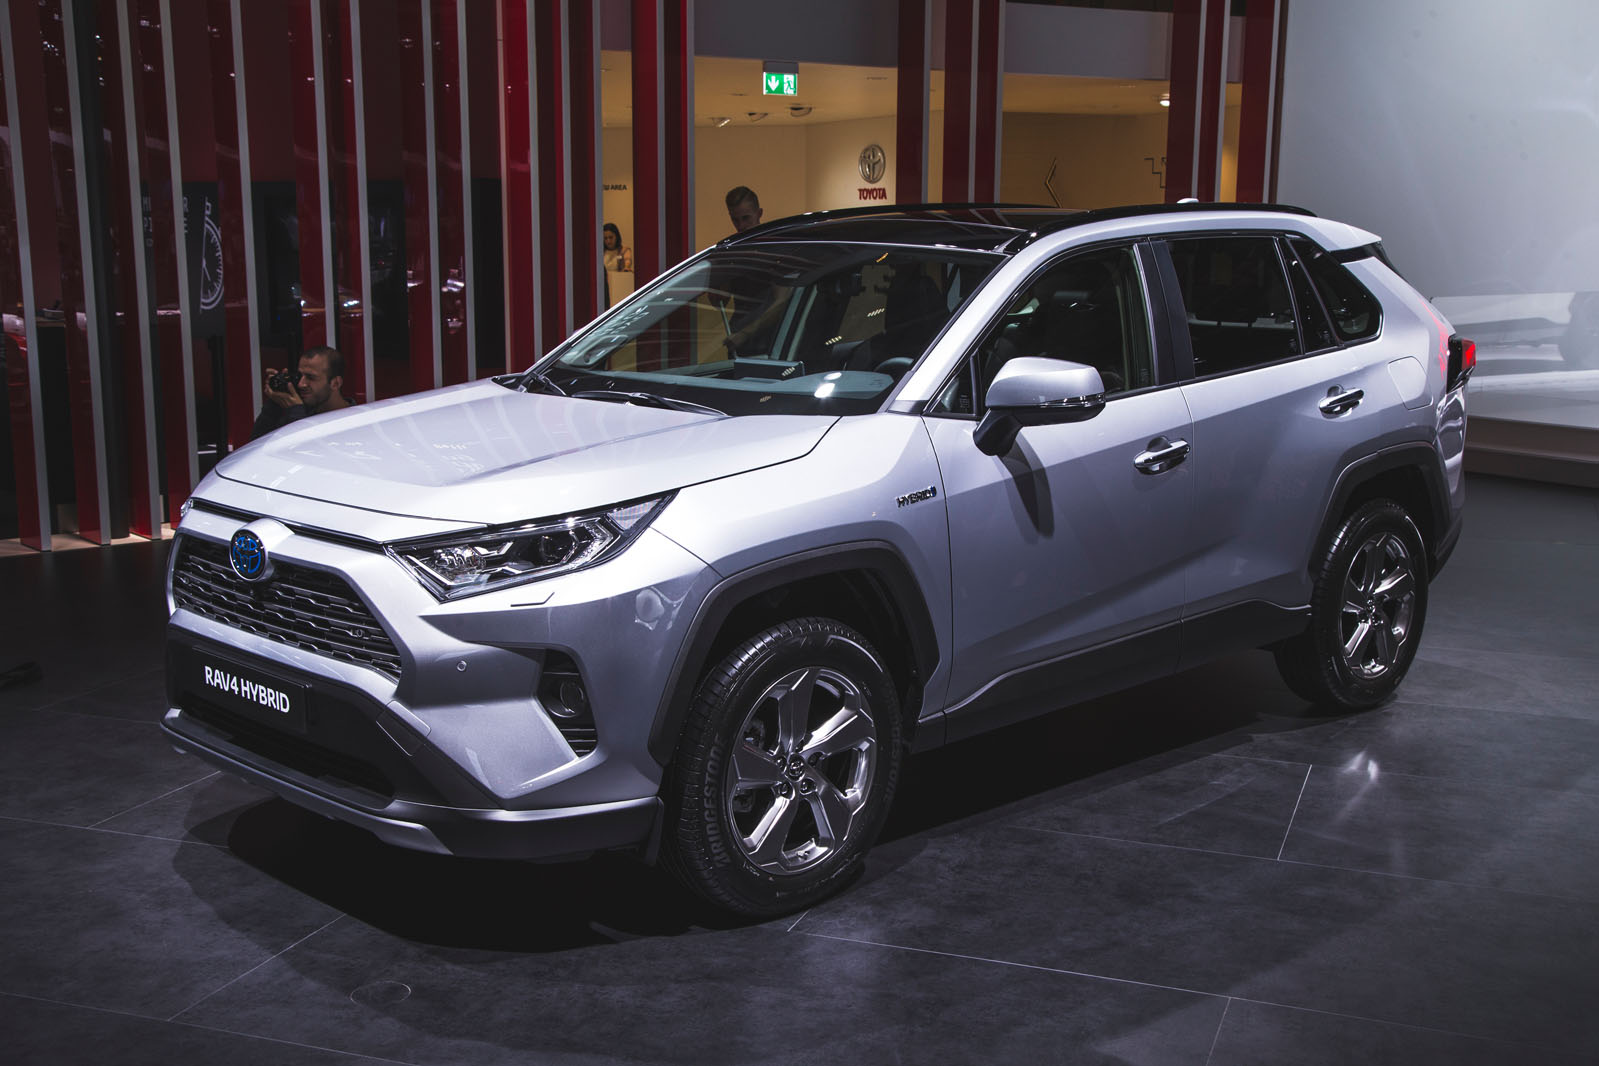 2019 Toyota Rav4 Prices Confirmed For Fifth Generation Suv Autocar